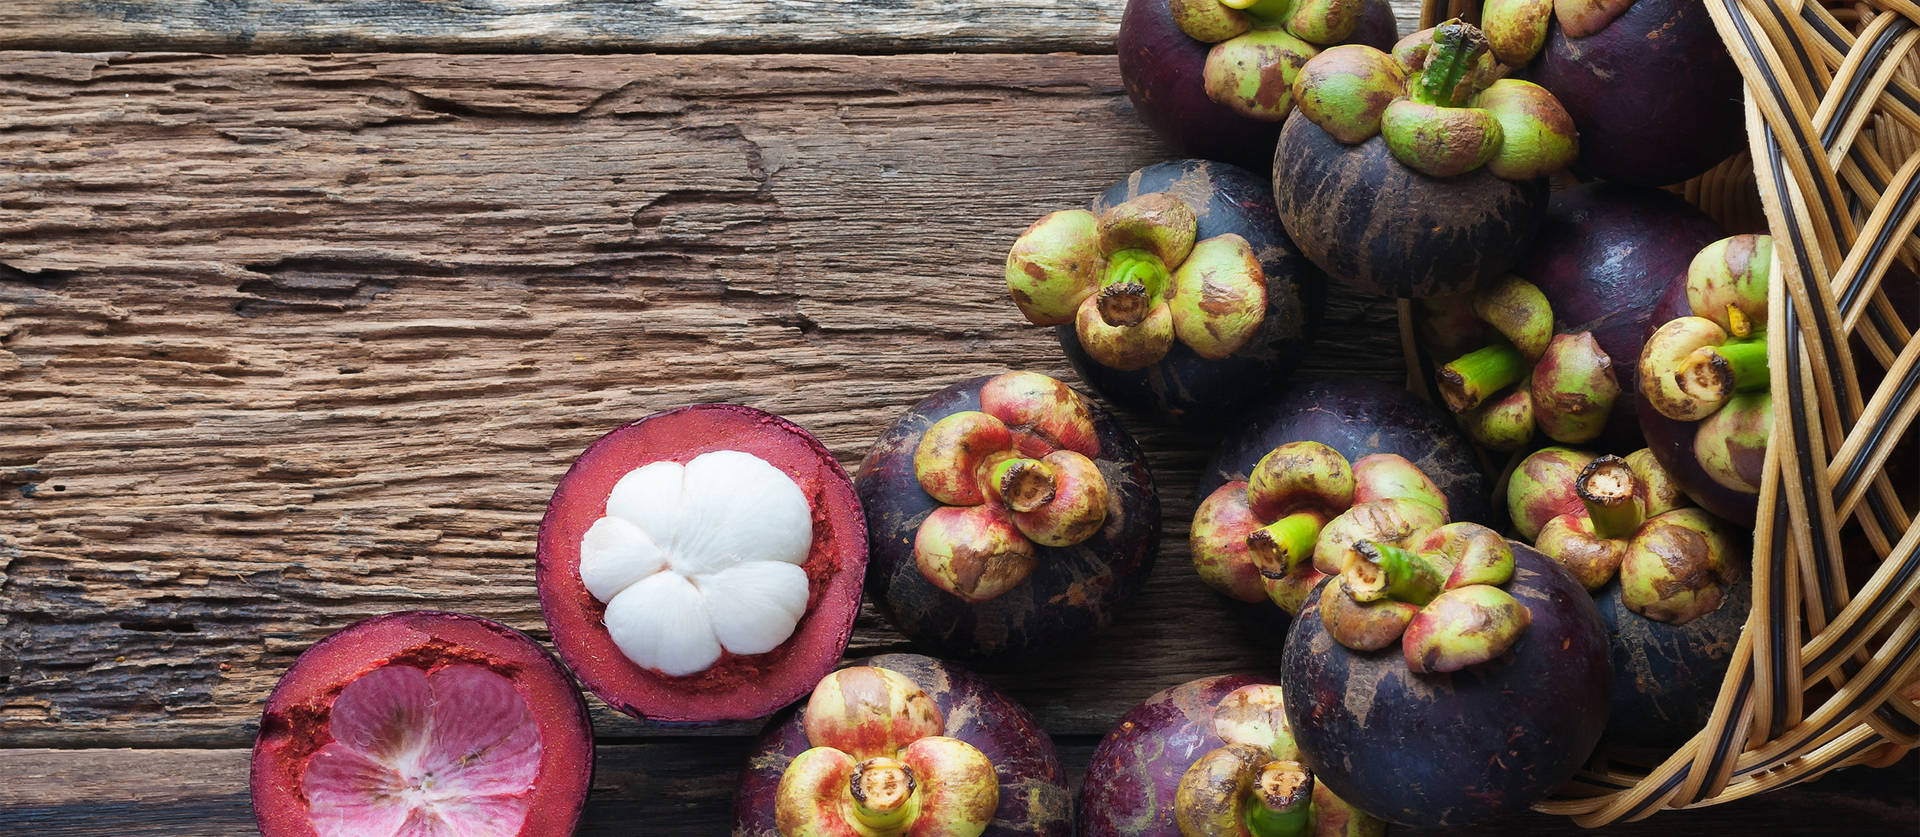 The Royal Mangosteen: Prowess in Purple Wallpaper